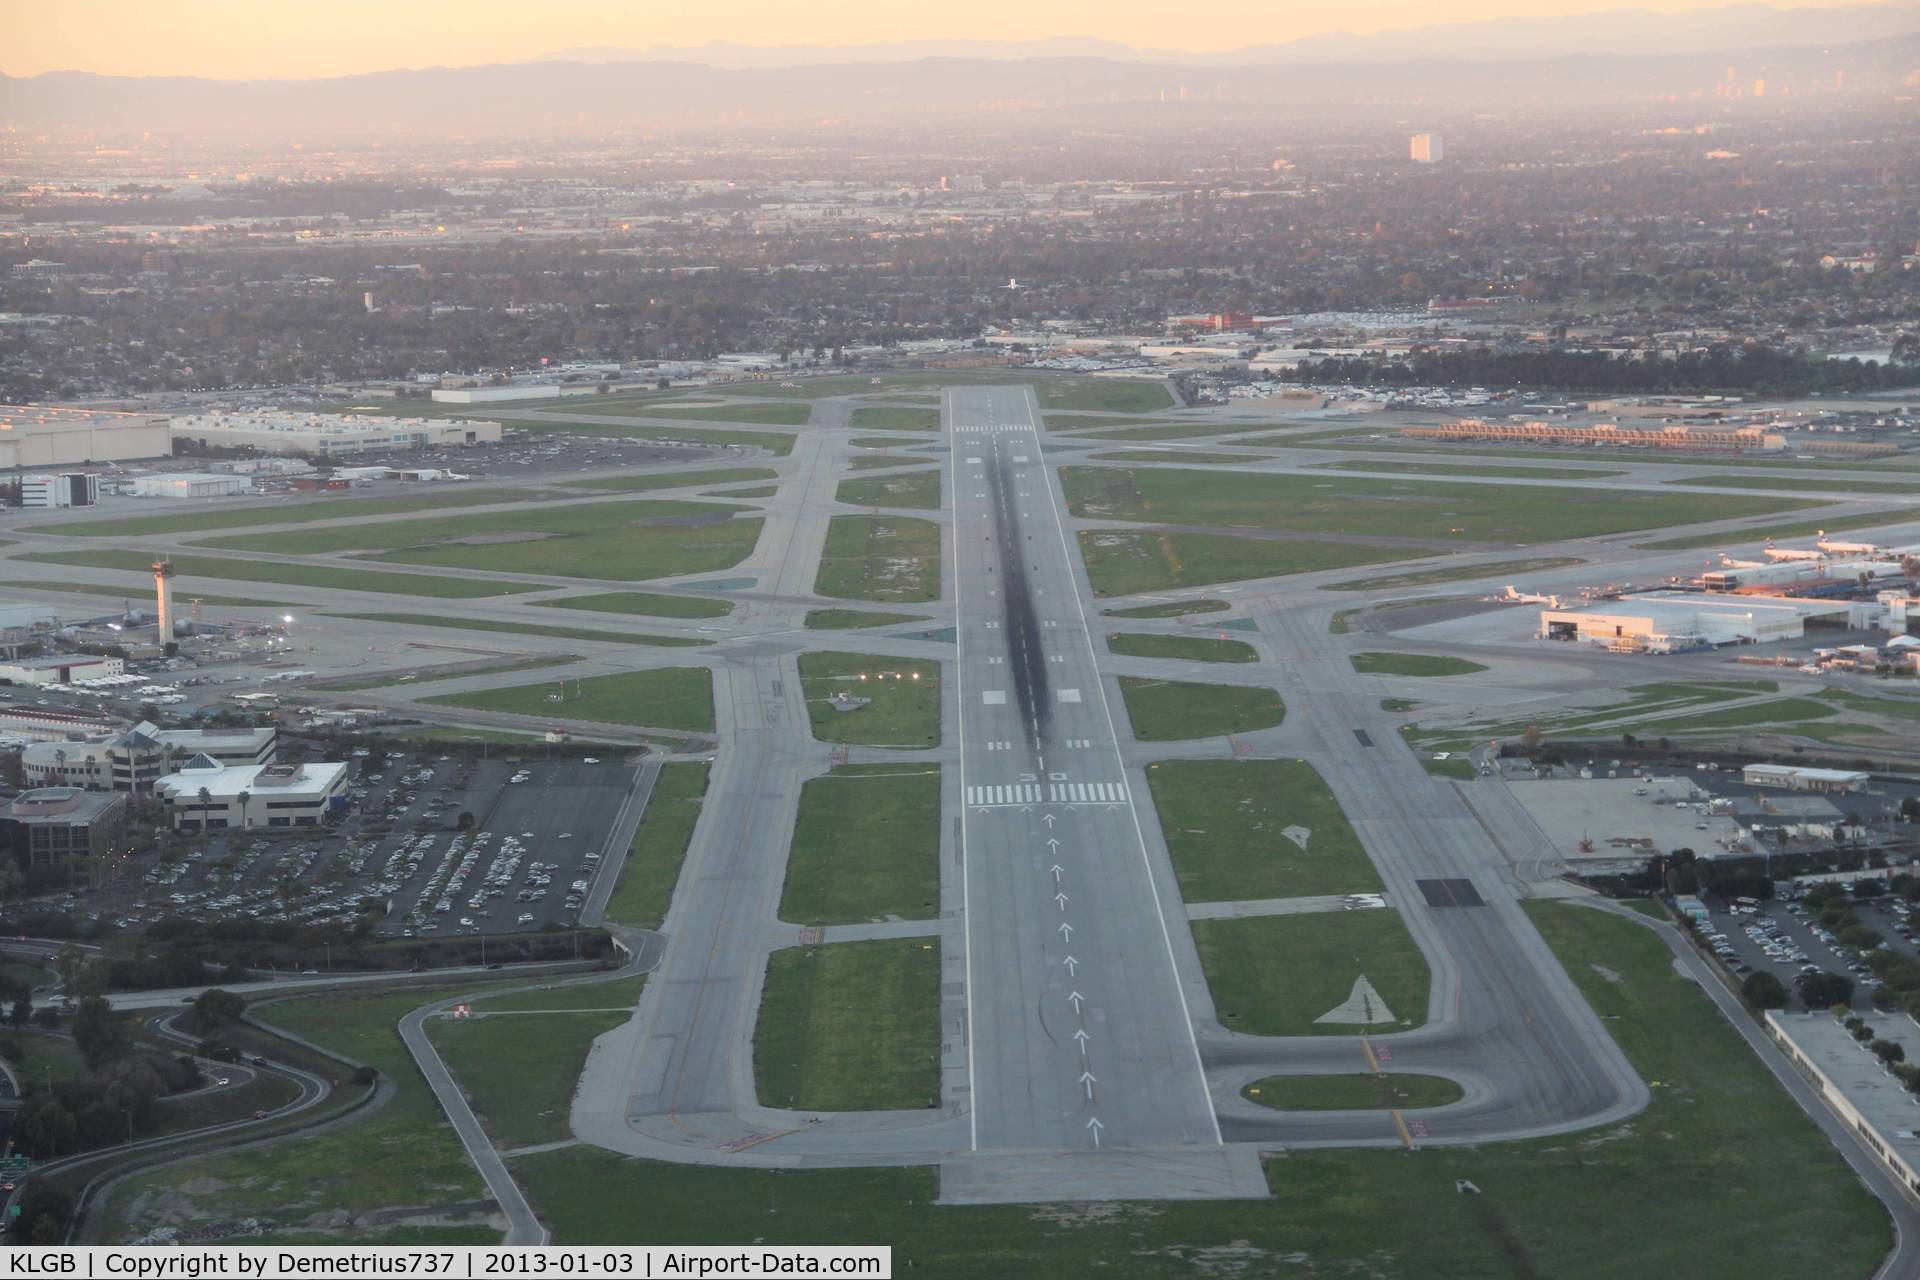 Long Beach /daugherty Field/ Airport (LGB) - Flying the approach into Long Beach busy airport.